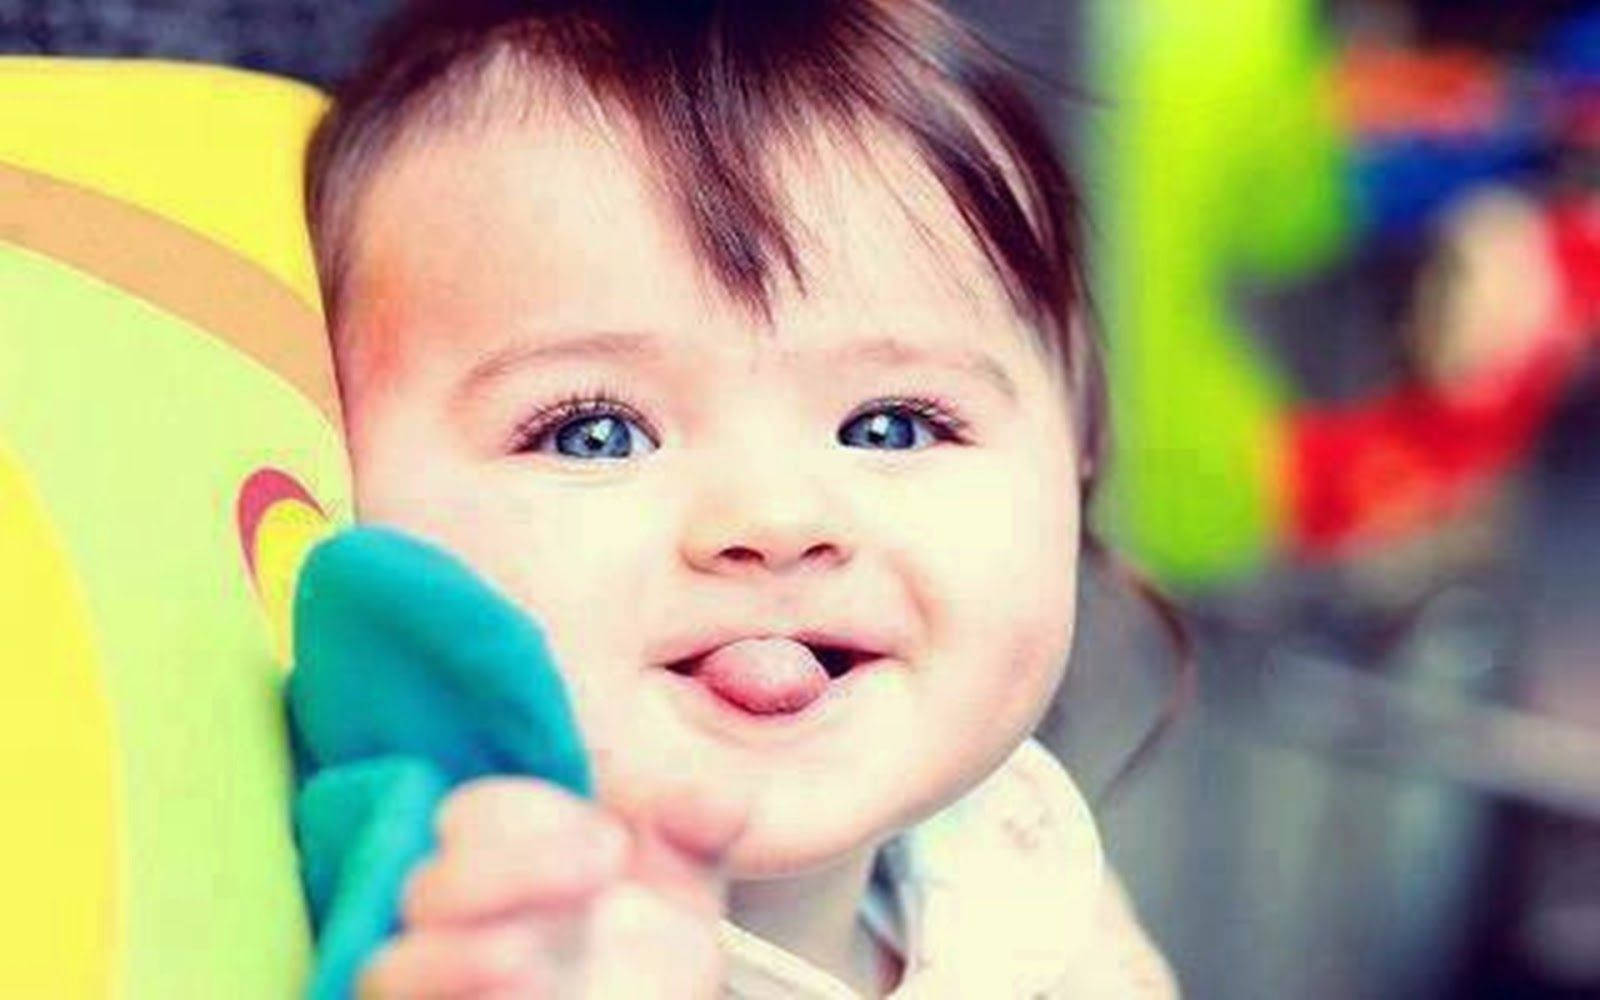 "A baby smilig and sticking their tongue out playfully." Wallpaper